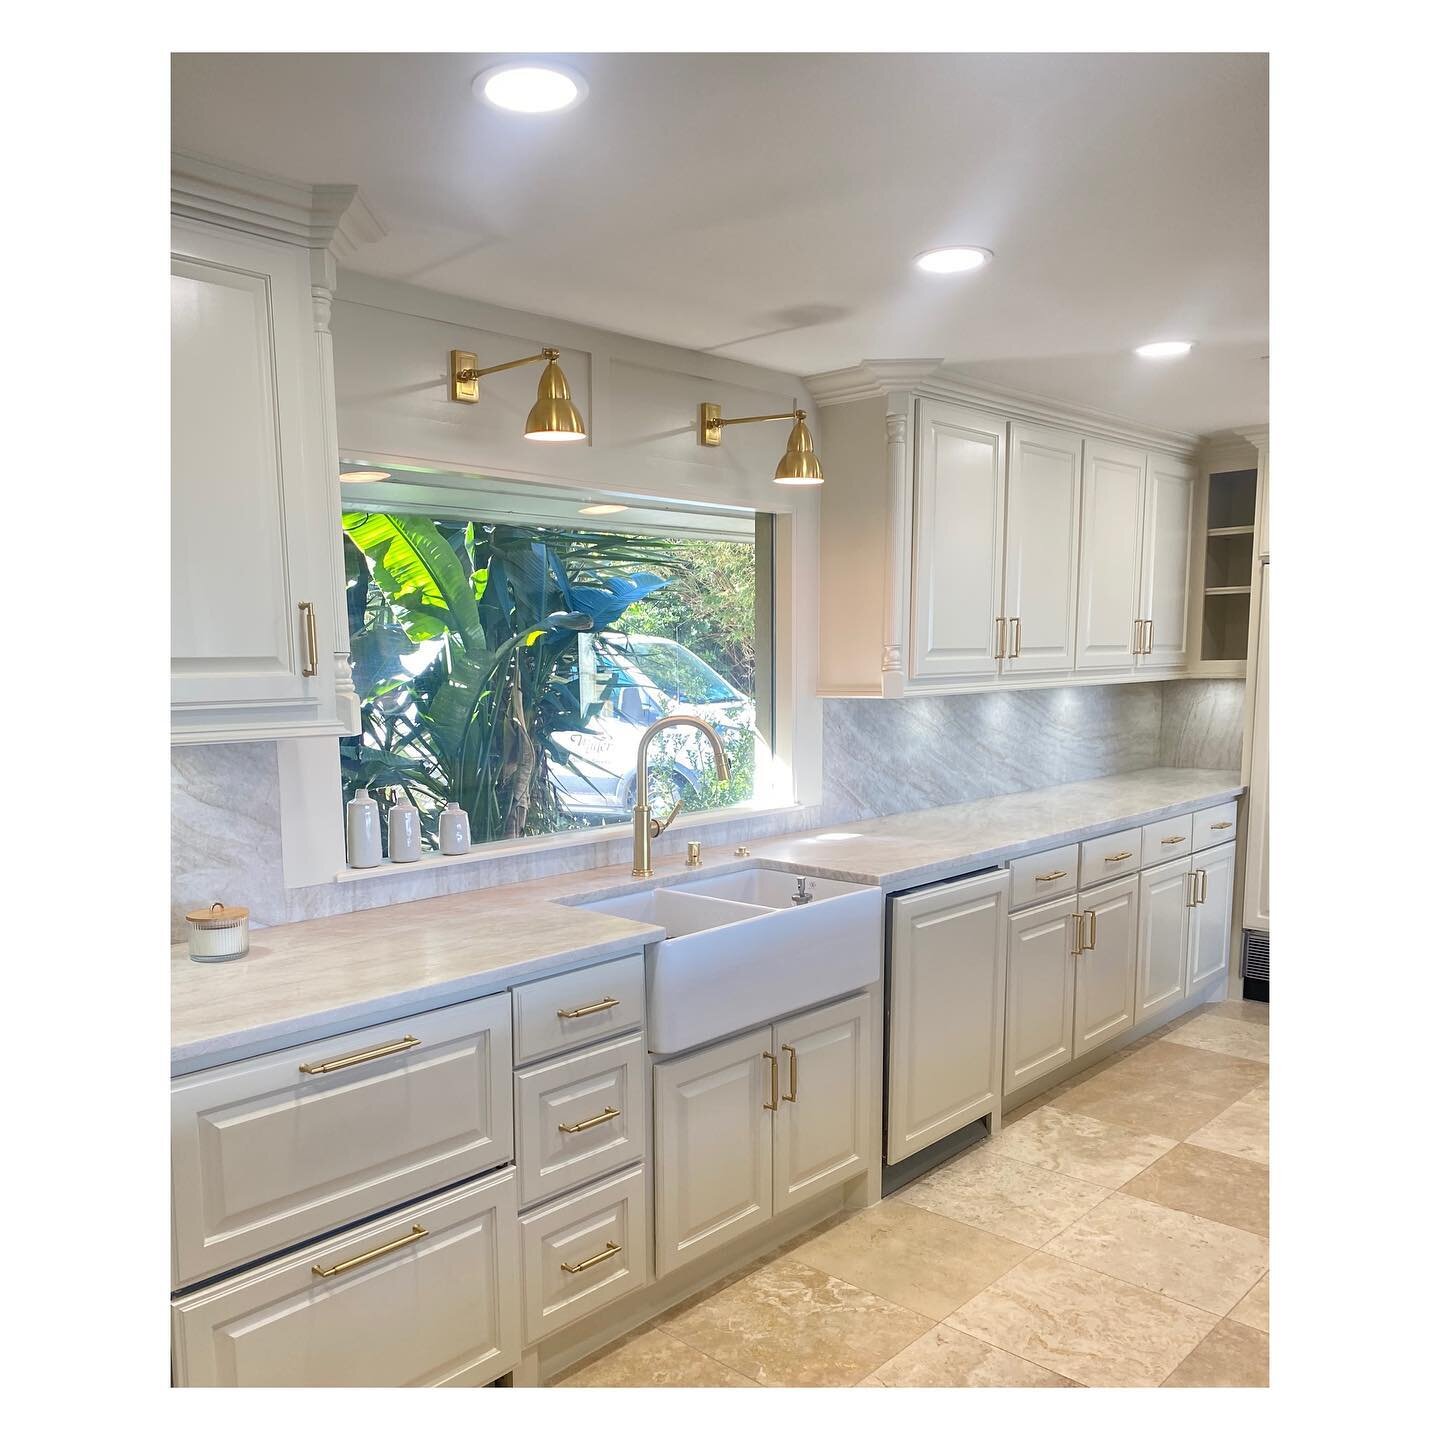 After experiencing setback after setback, when we finally finished this beach house kitchen, the freeze destroyed it. Not every project is all rainbows, but hoping for a rainbow for these sweet clients 🌈 it sure was beautiful for a minute. 
📷 @milk